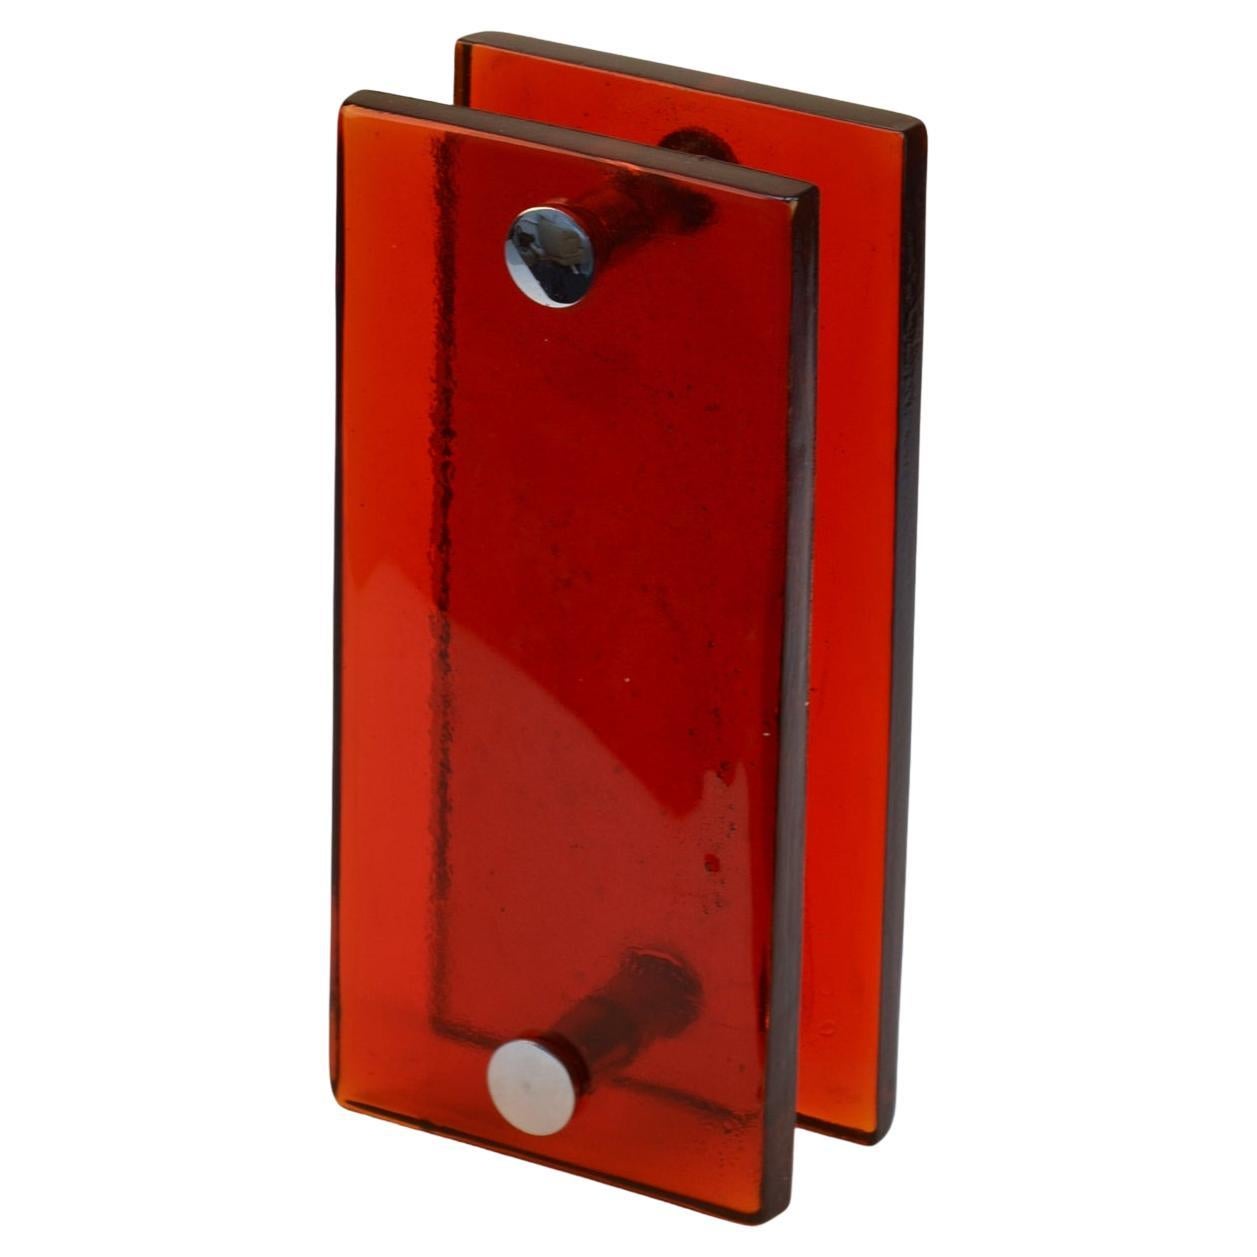 Two pairs of double door handles, push and pull, rectangular vibrant red cast glass with chrome fittings designed for a glass or wooden doors but suitable for any kind of doors. The glass slabs are cast by directing molten glass into a mold where it